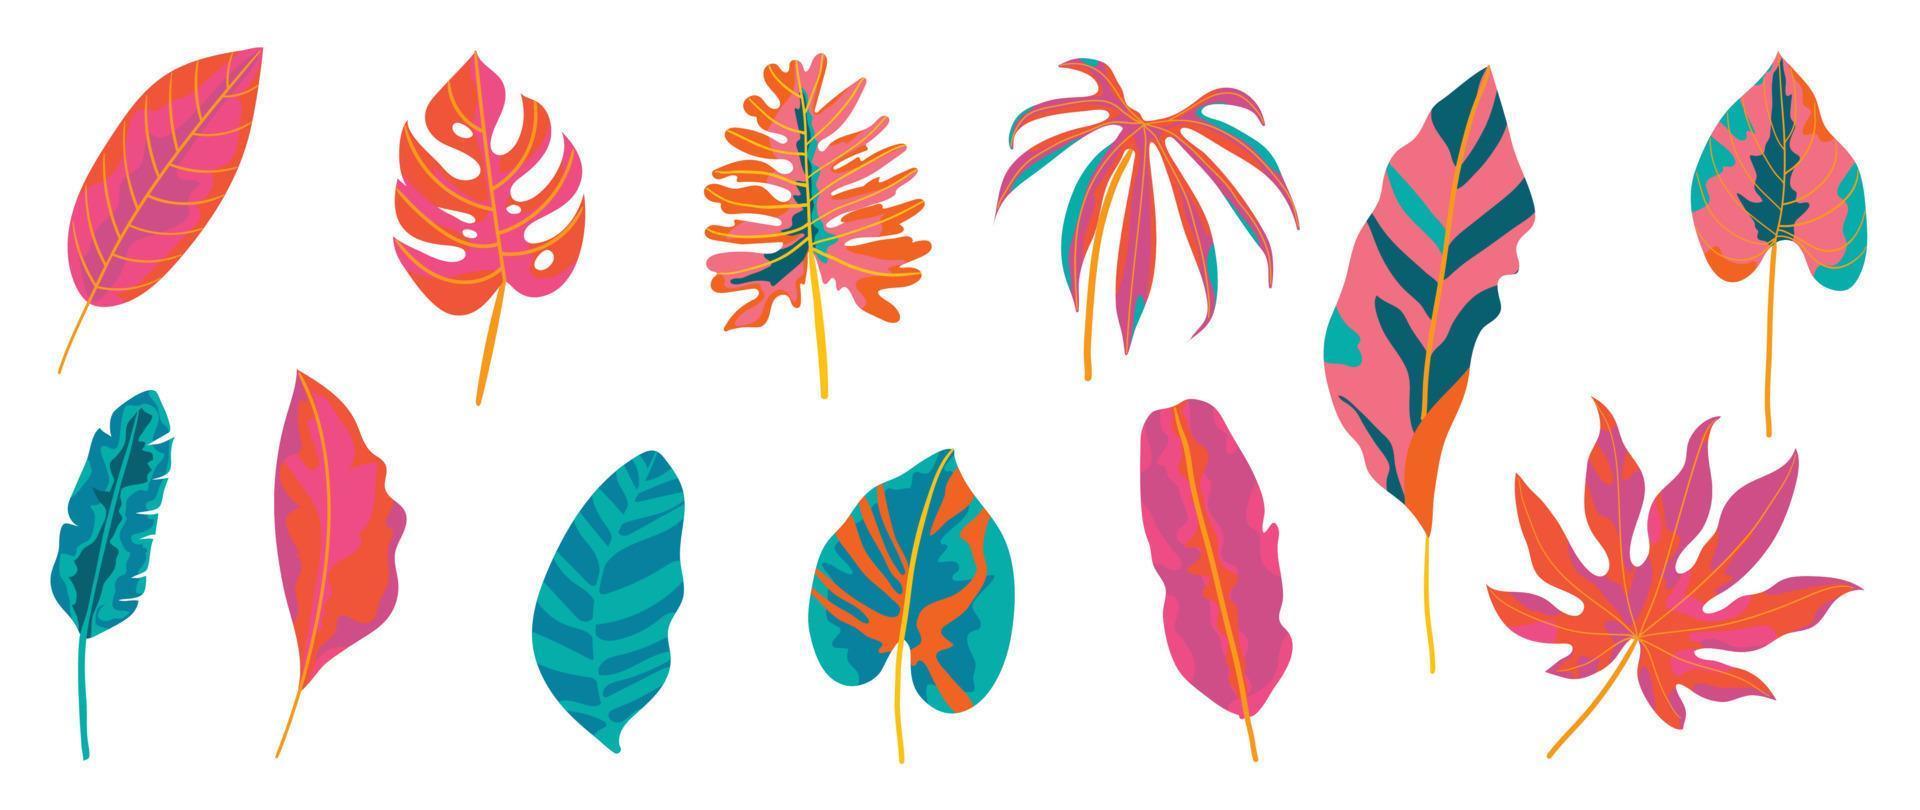 Hand painted tropical leaves vector set. Botanical exotic colorful foliage, jungle plants, palm leaves painting style isolated on white background. Design for cosmetic, product, spa, decoration.